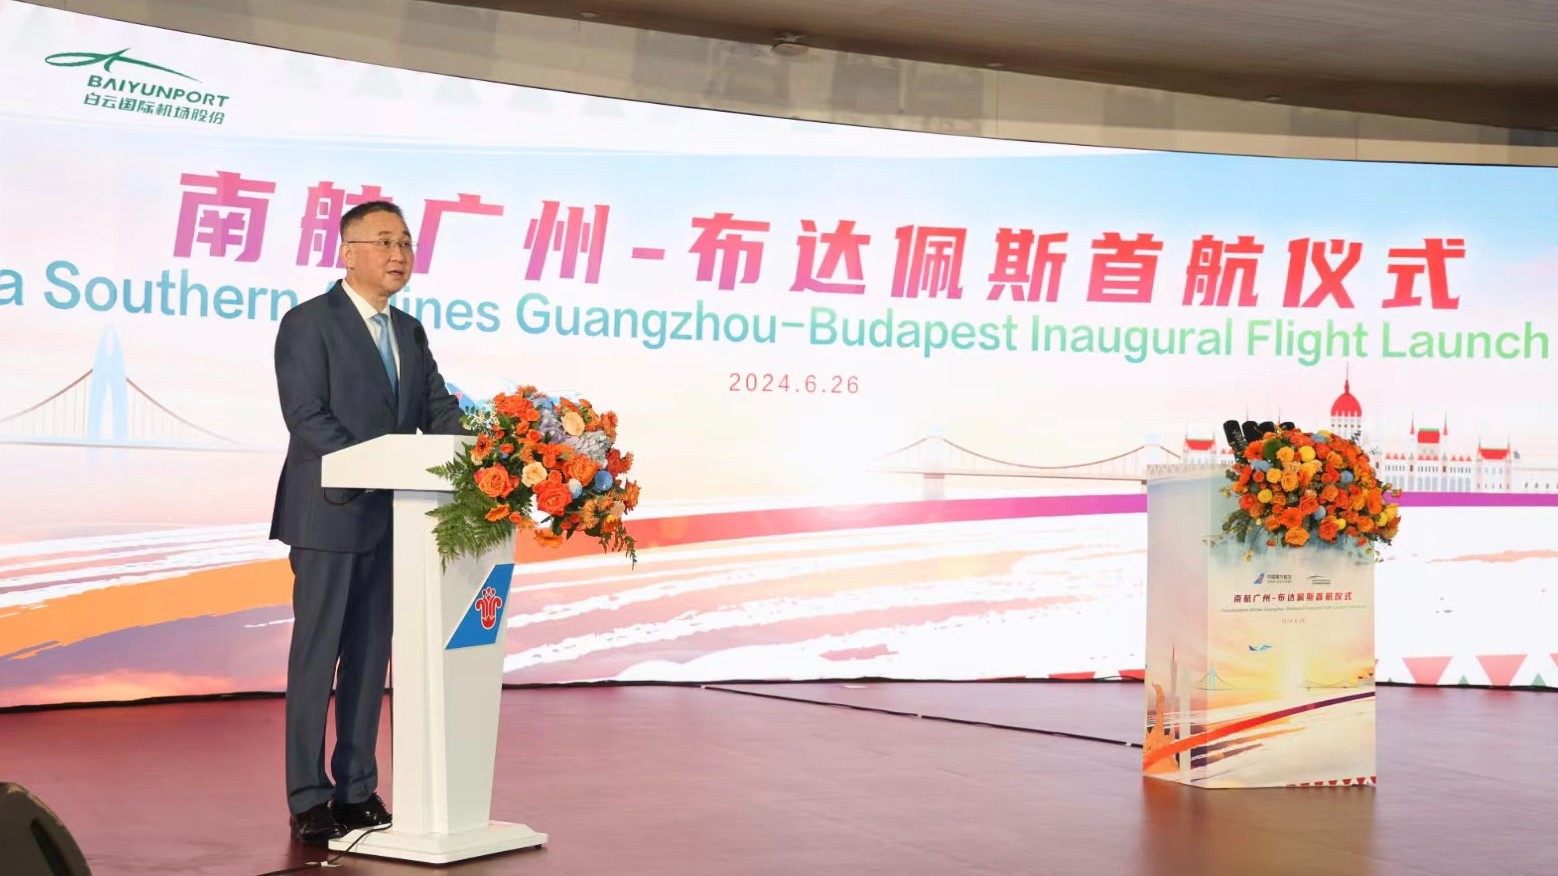 China Southern launched 1st direct route linking GBA and Hungary